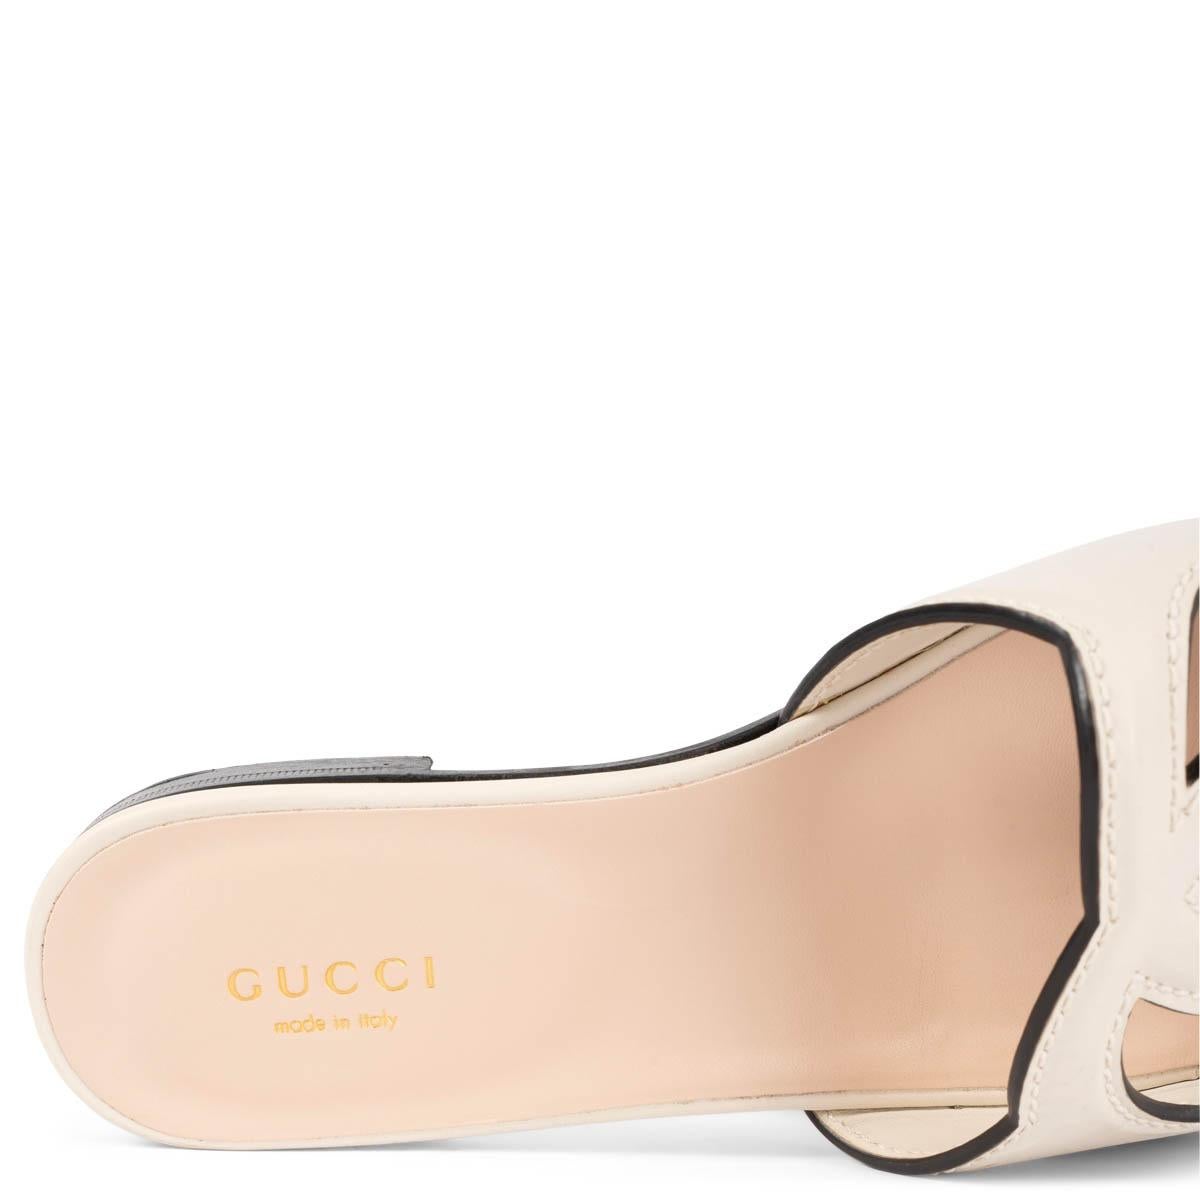 GUCCI cream leather INTERLOCKING G CUT-OUT SLIDE Sandals Shoes 35 For Sale 2